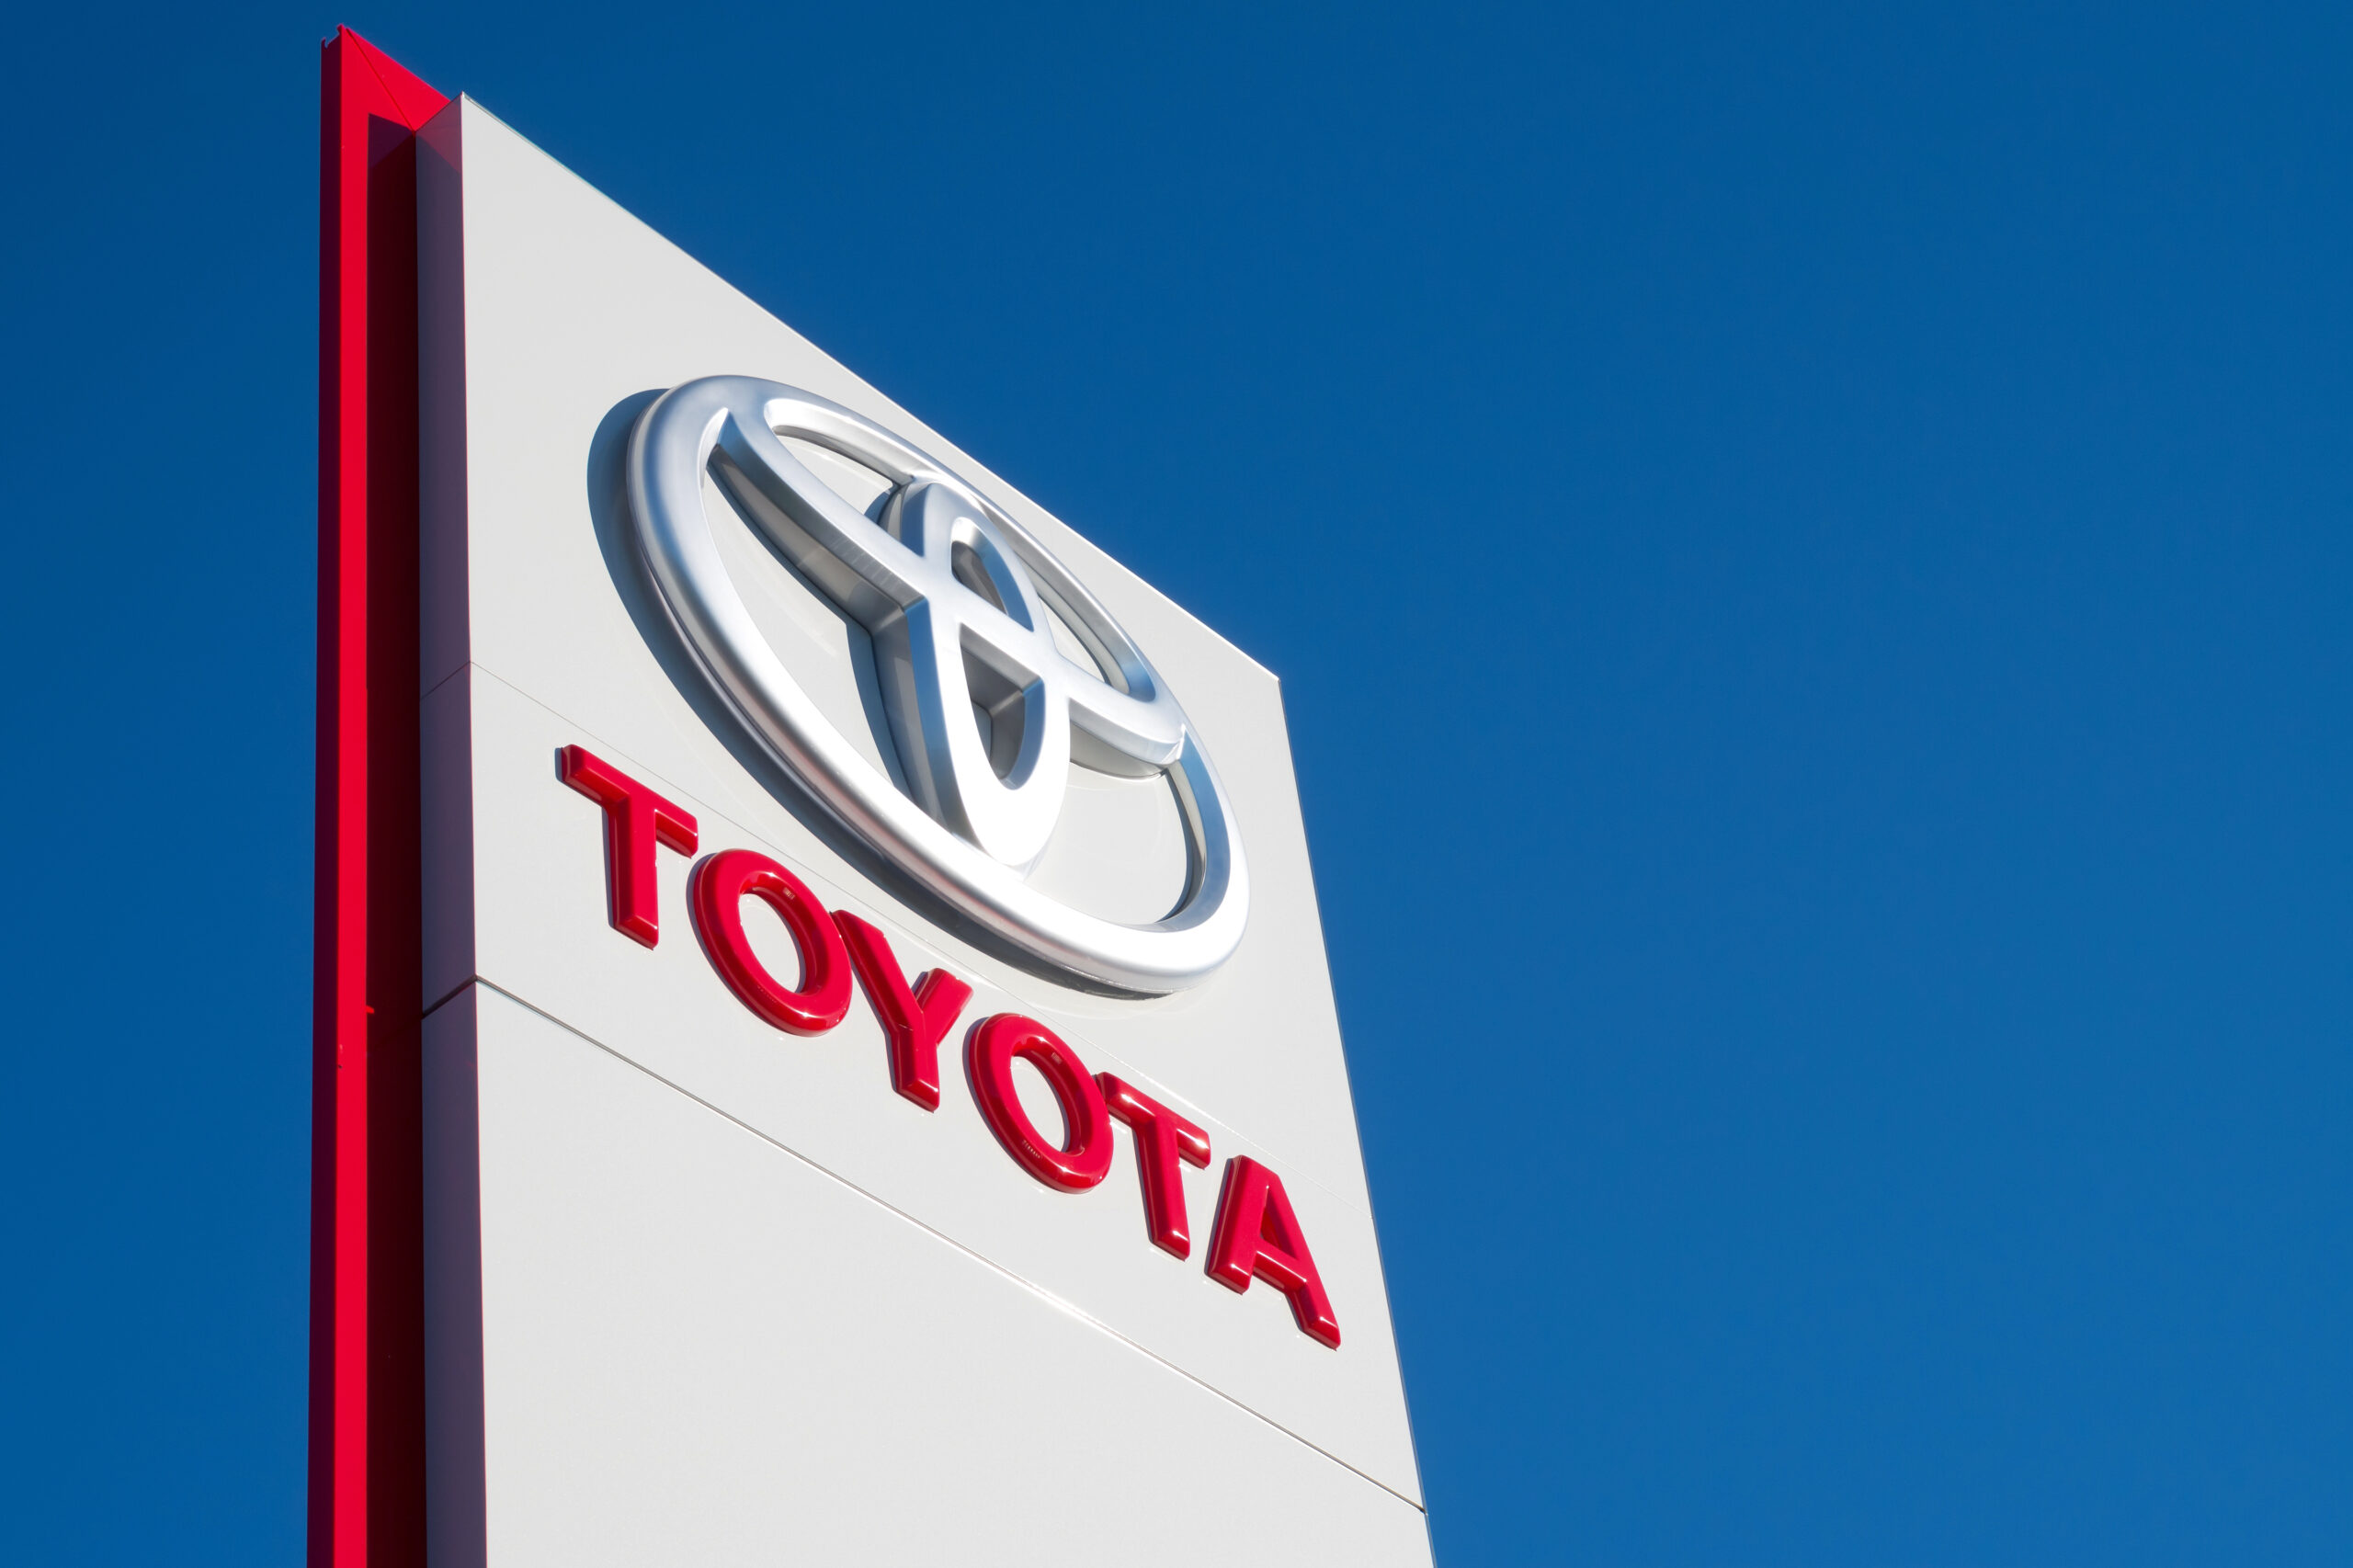 Toyota to Invest $5.6B in EV Battery Manufacturing while Eyeing Hydrogen Fuel Cell Market